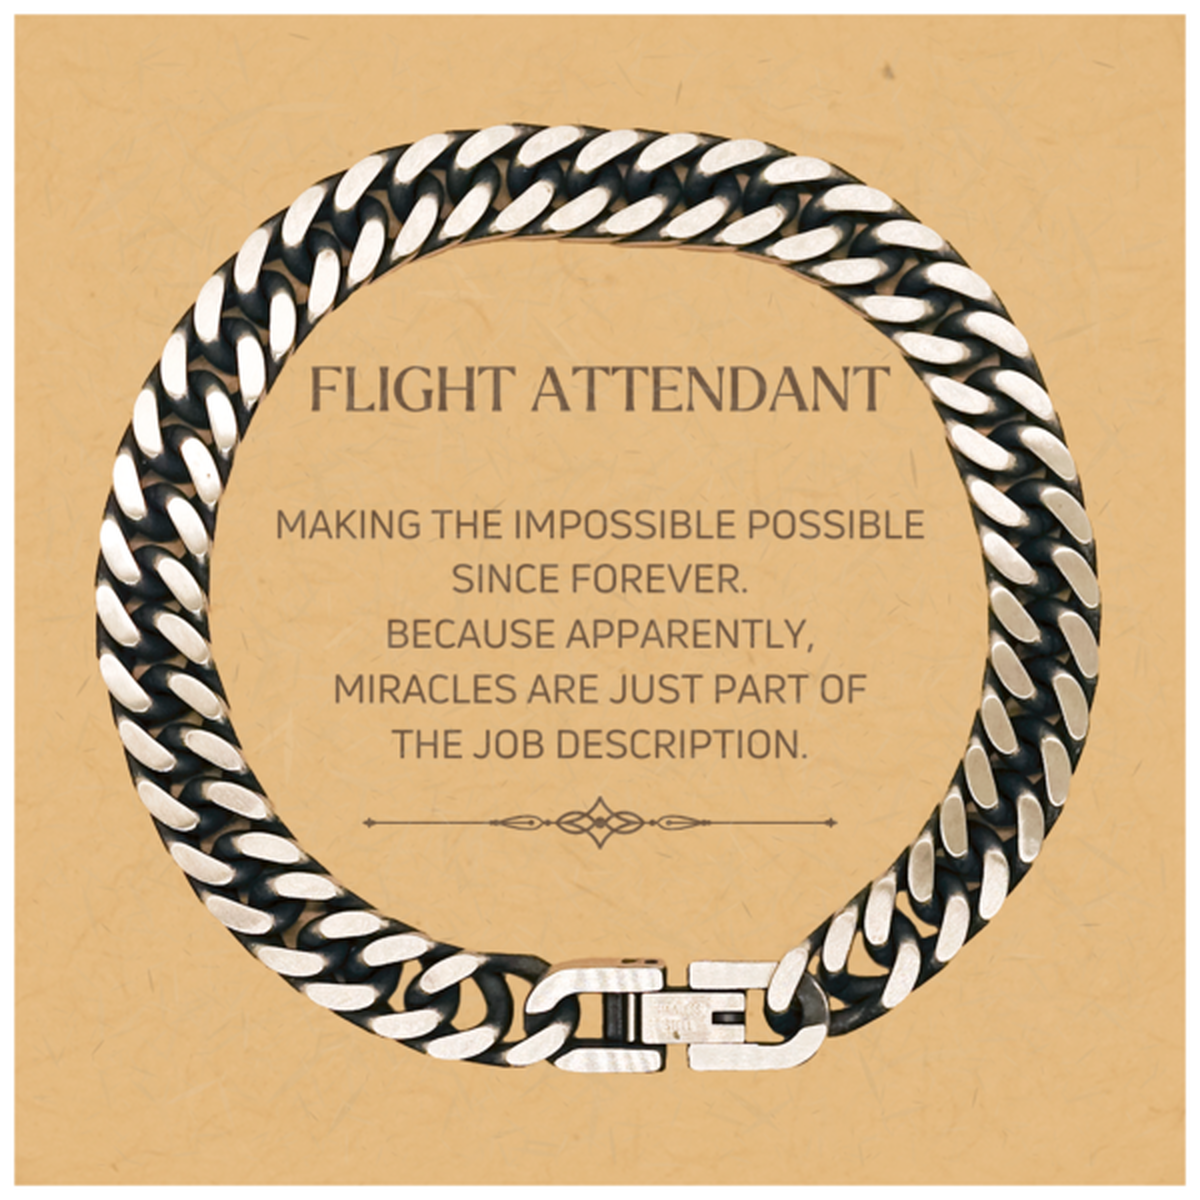 Funny Flight Attendant Gifts, Miracles are just part of the job description, Inspirational Birthday Christmas Cuban Link Chain Bracelet For Flight Attendant, Men, Women, Coworkers, Friends, Boss